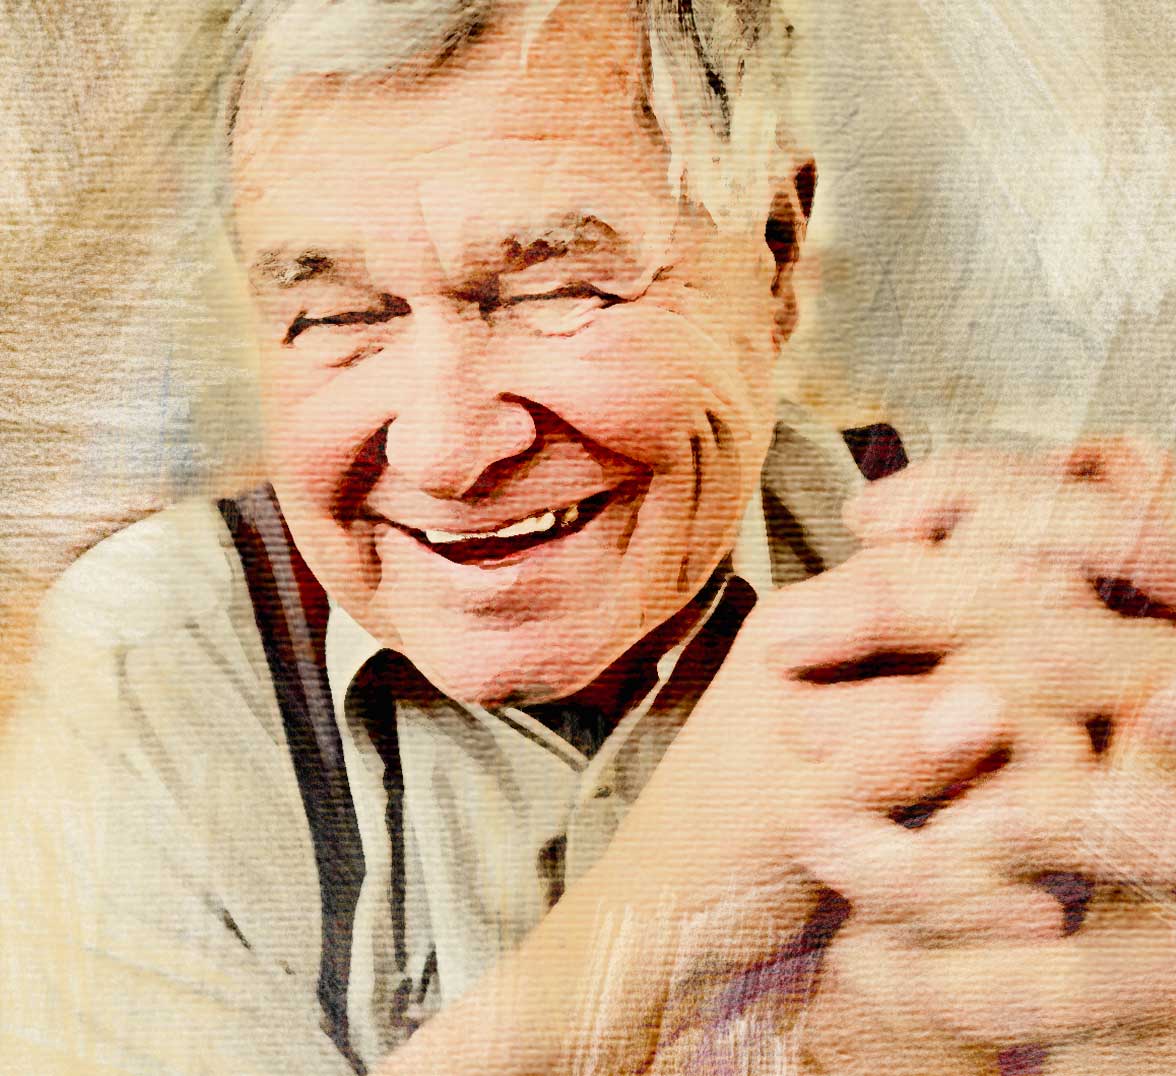 Drawn image of a man smiling while putting his hands together